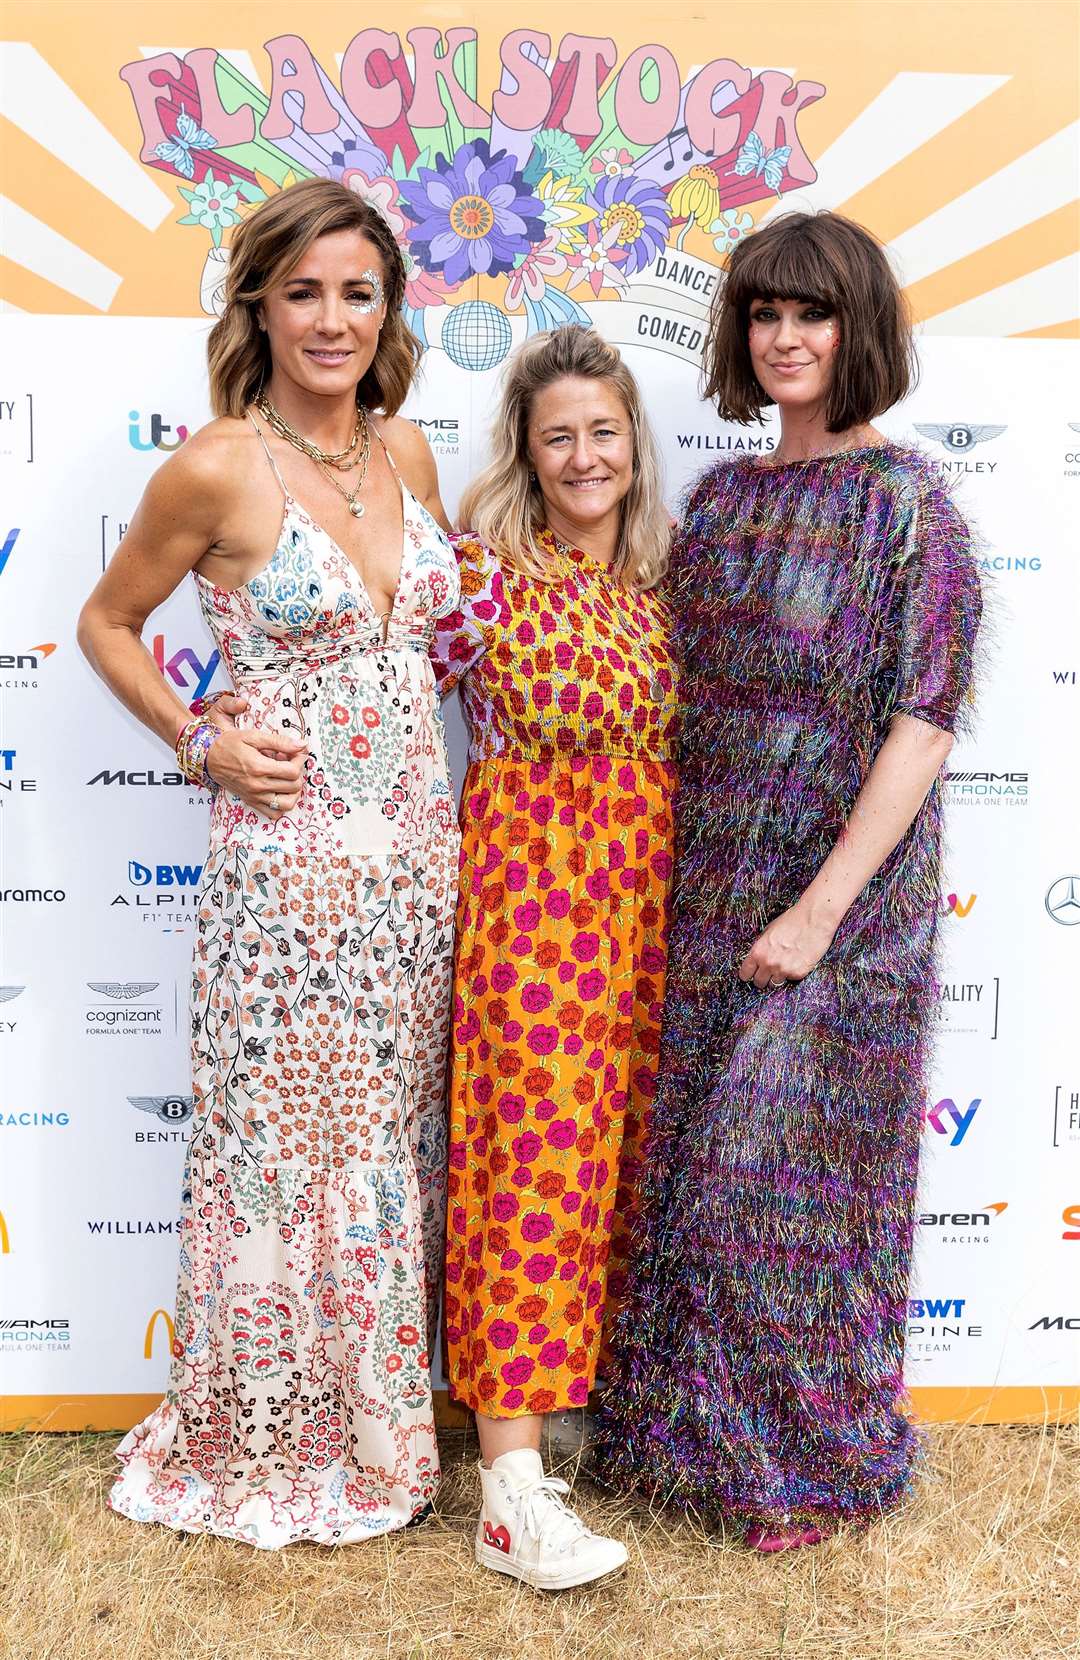 Natalie Pinkham (left) at the Flackstock festival with Caroline Flack’s twin sister Jody Flack (centre) and friend TV presenter Dawn O’Porter who is the festival’s co-founder (PA)